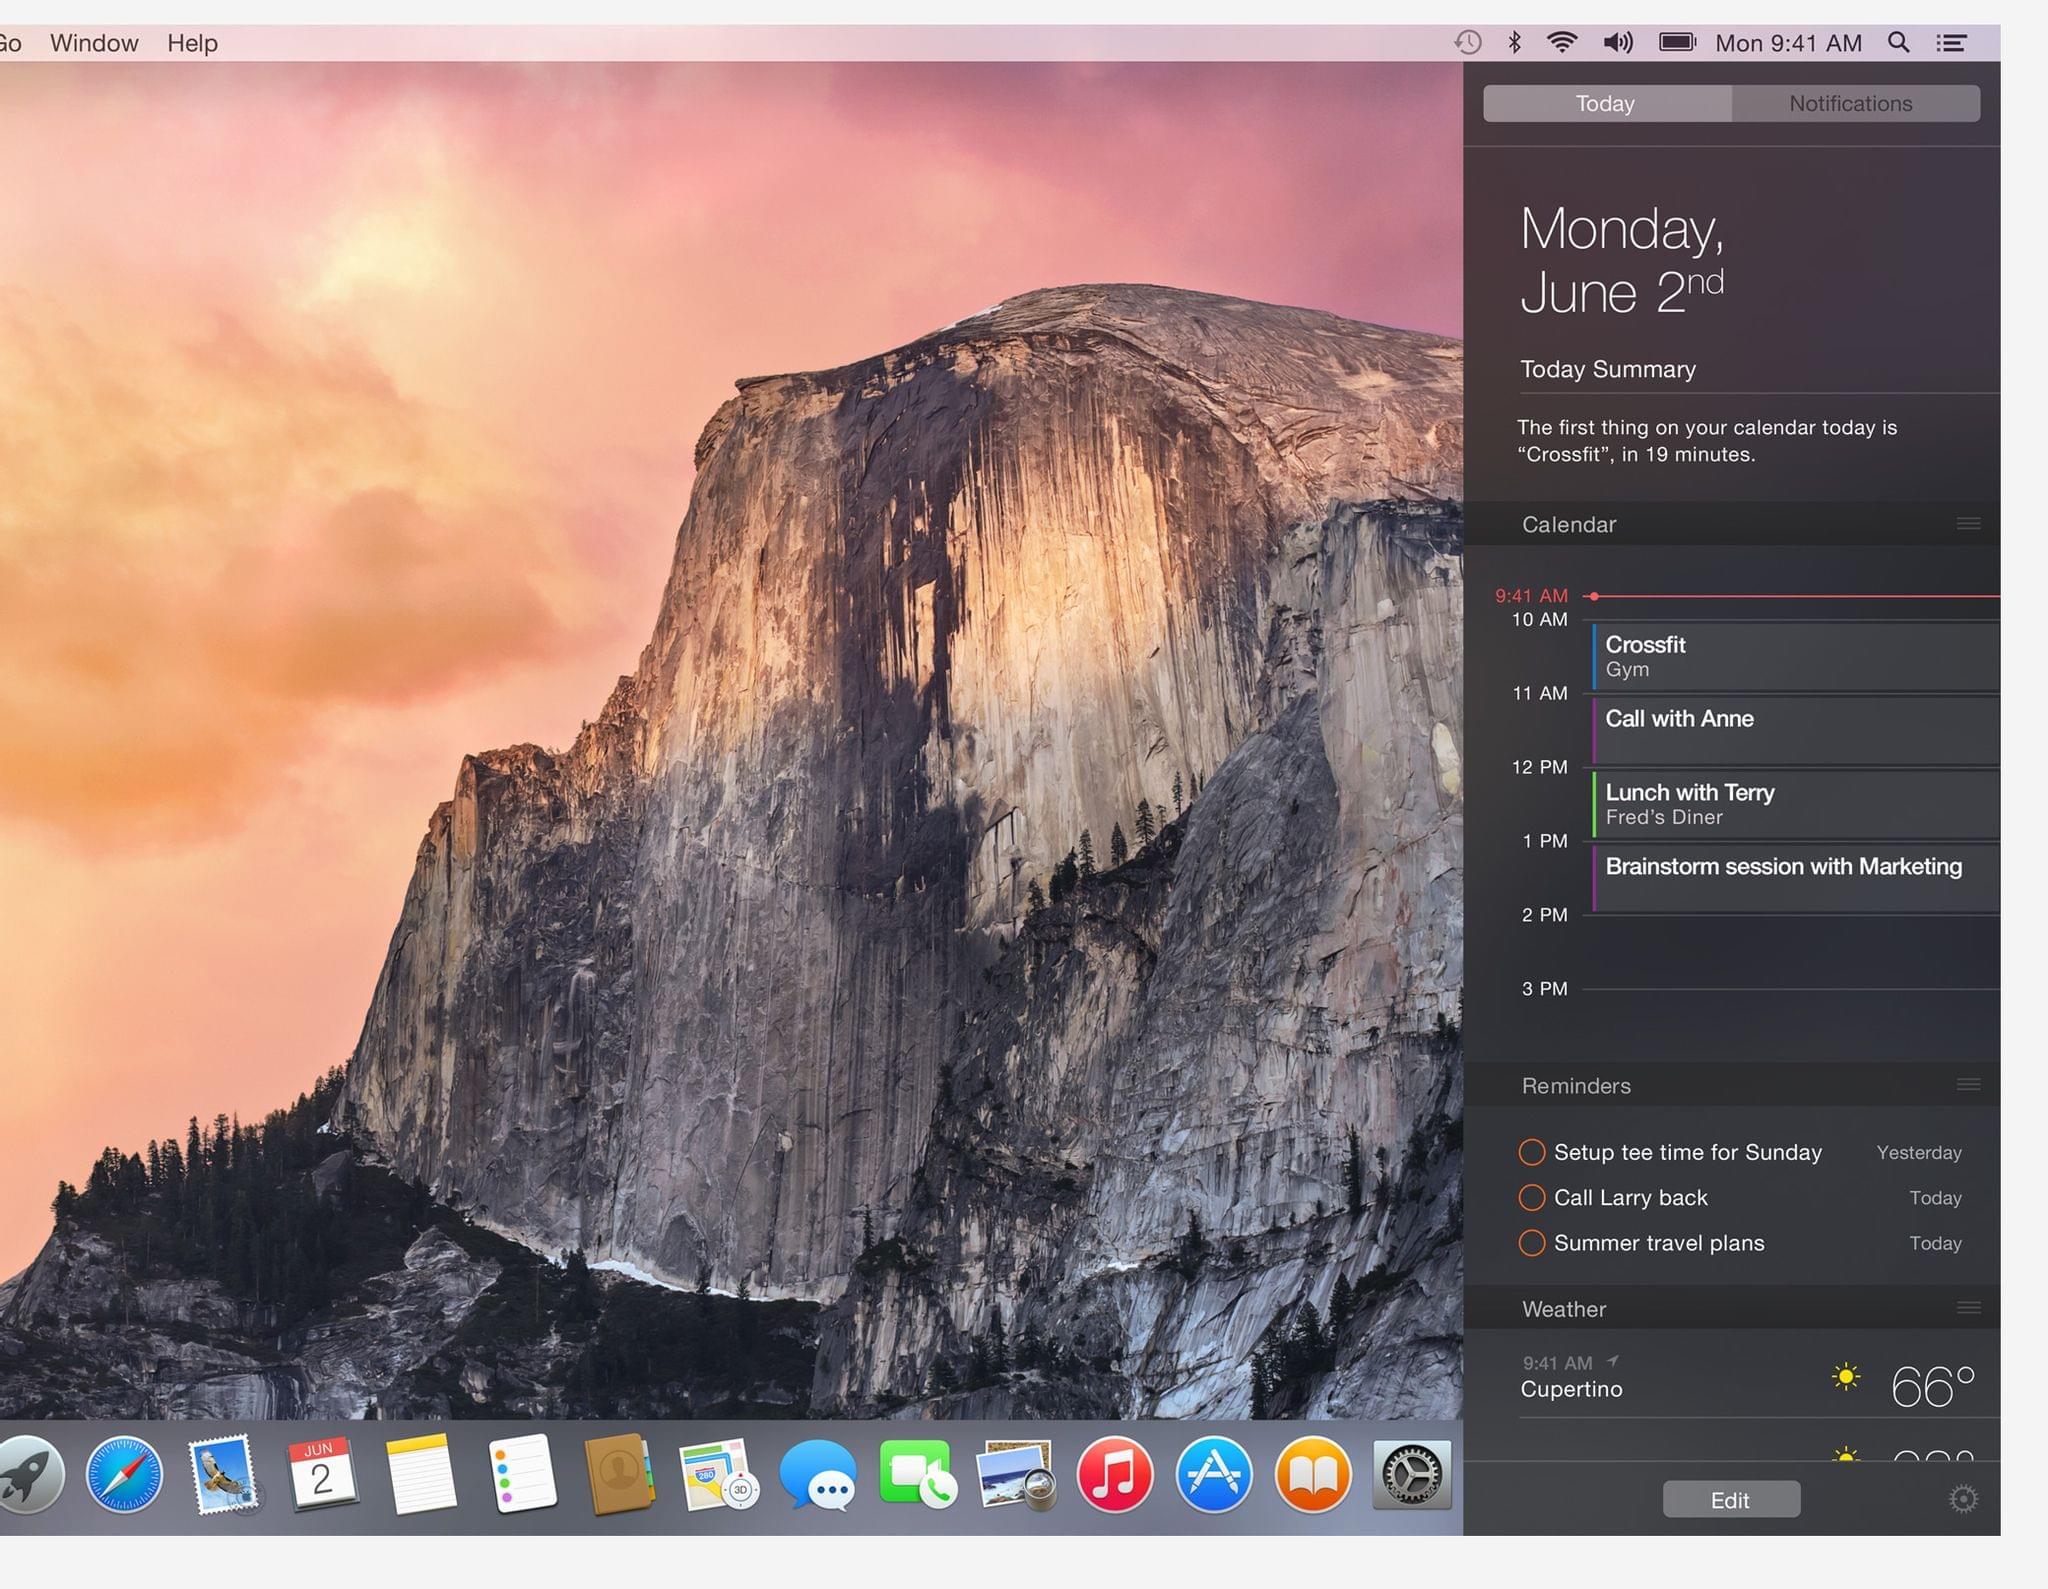 In 2014, Yosemite moved widgets from [Dashboard](https://en.wikipedia.org/wiki/Dashboard_(macOS)) to a new Today view that became Notification Center.